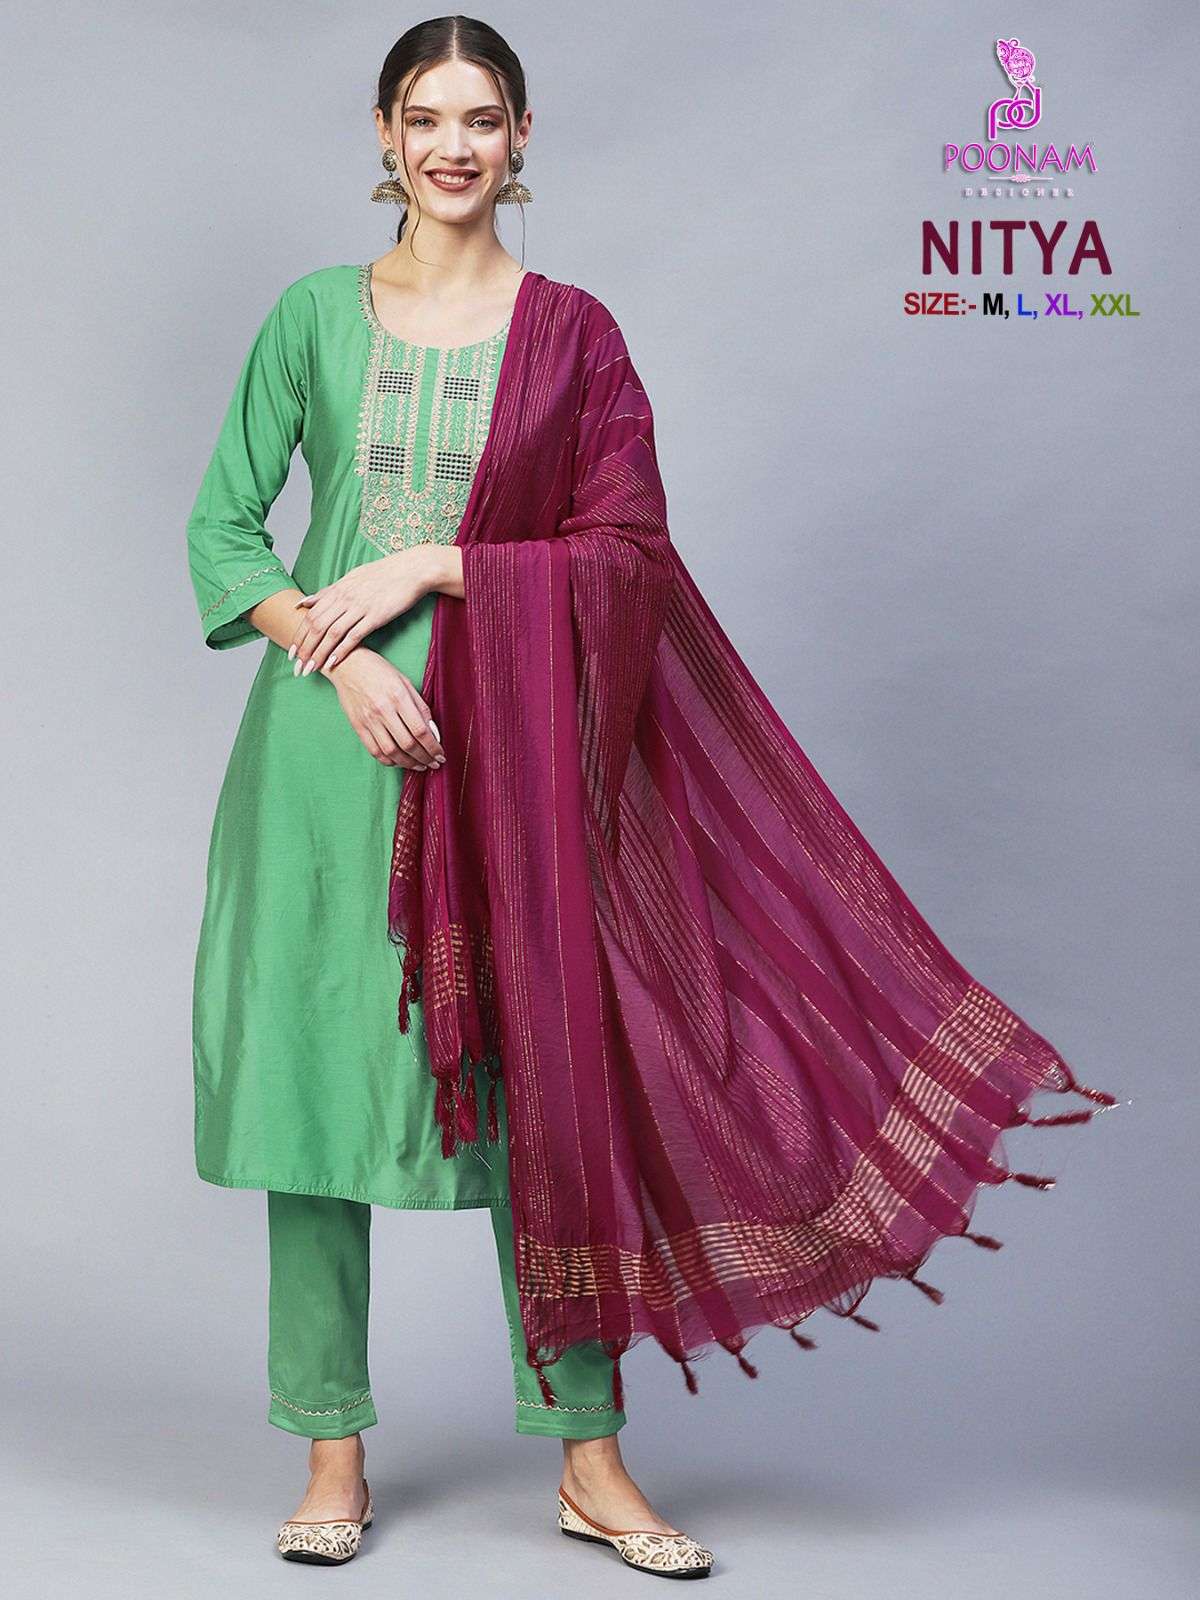 NITYA COTTON KURTI WITH BOTTOM AND DUPATTA BY POONAM BRAND WHOLESALR AND DELER